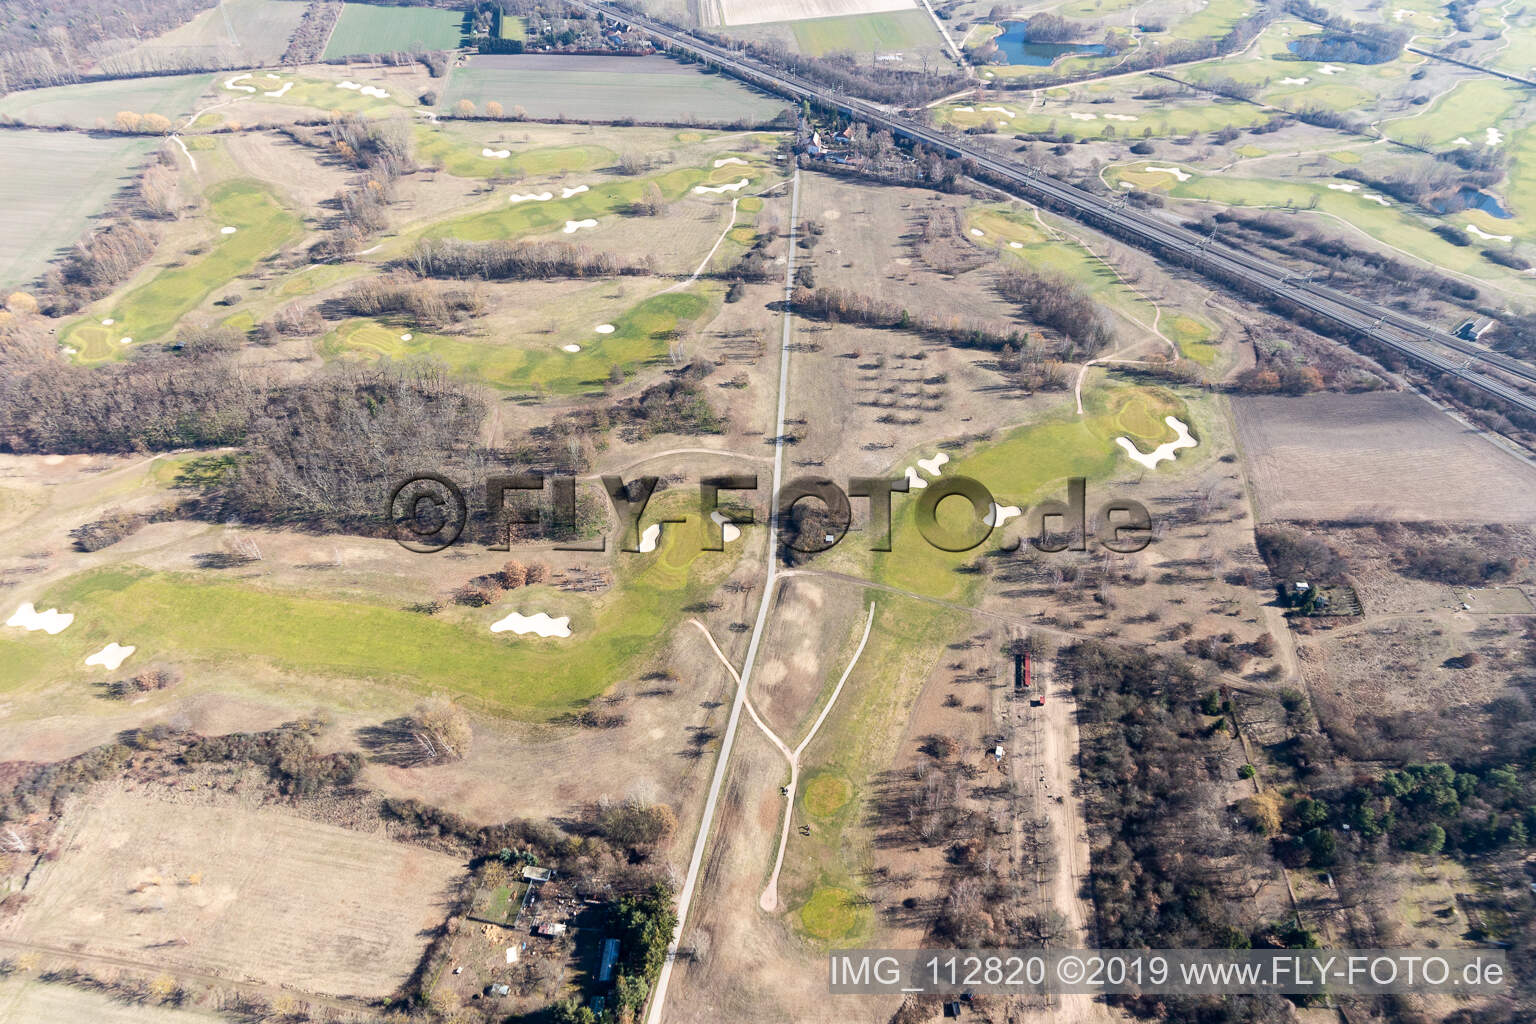 Aerial photograpy of Kurpfalz golf course in Limburgerhof in the state Rhineland-Palatinate, Germany